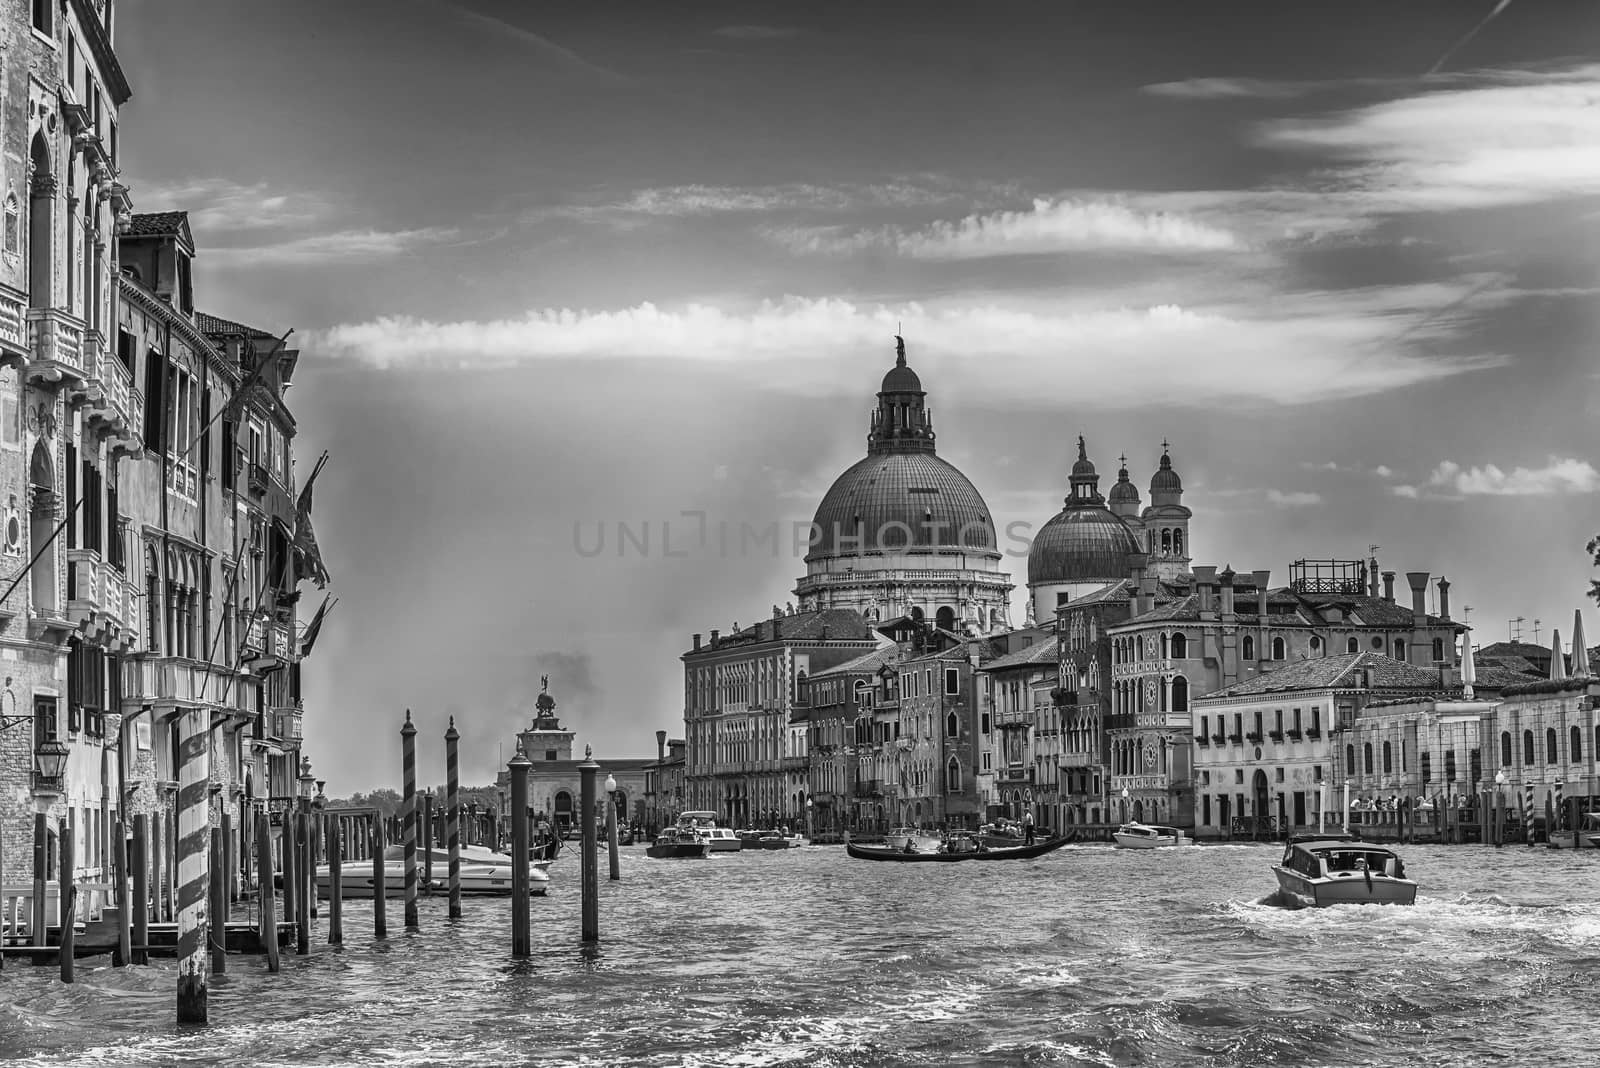 Scenic view of the Grand Canal in Venice, Italy by marcorubino